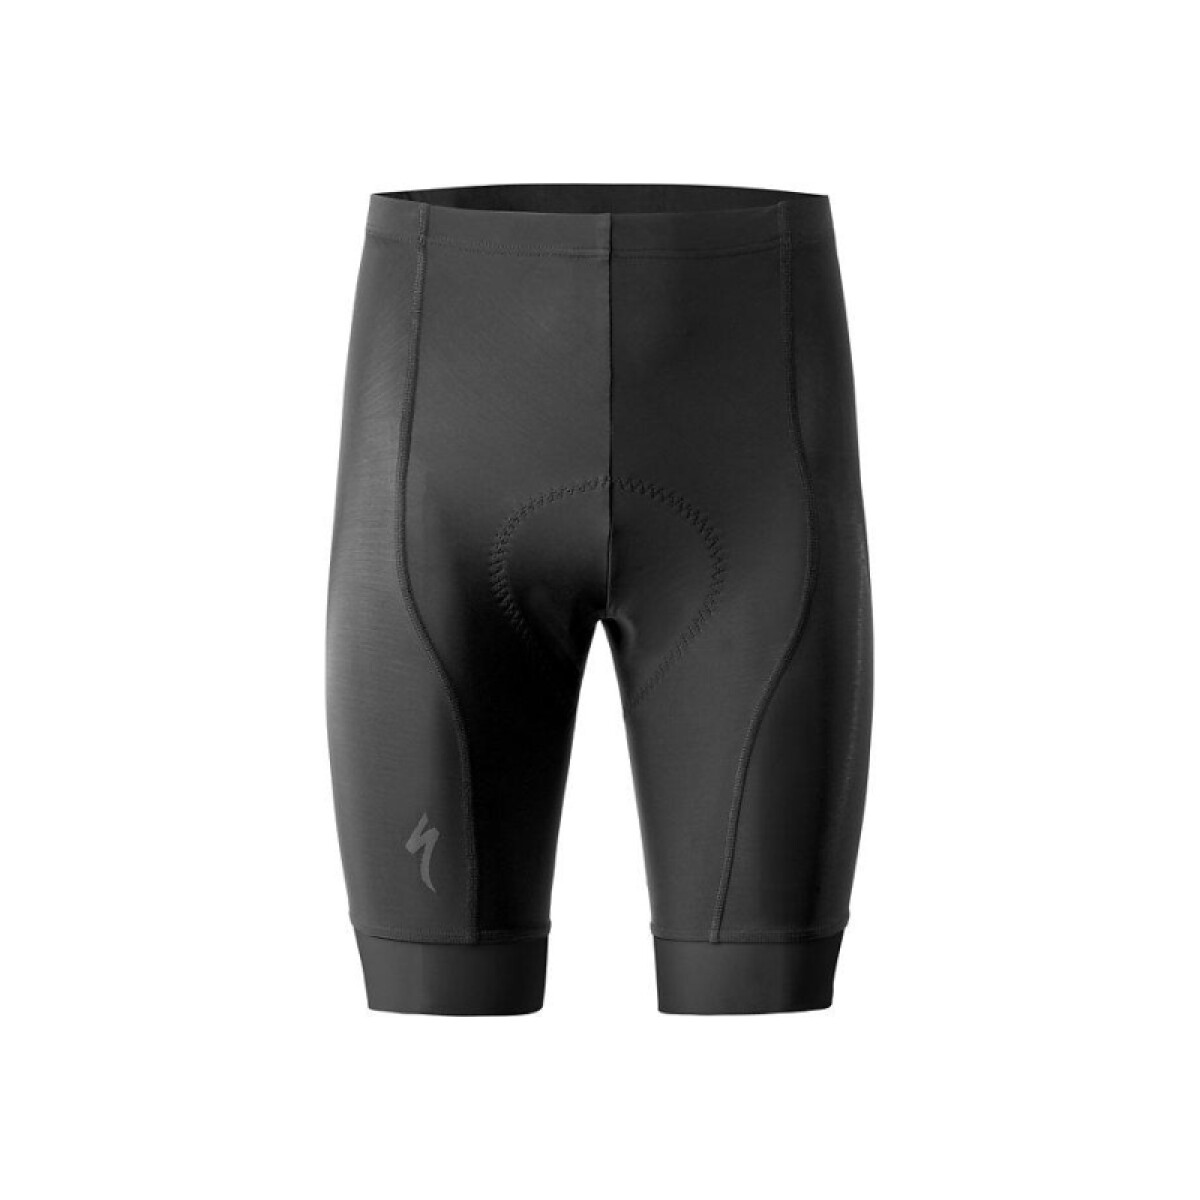 Calza Corta Specialized Rbx Short Blk - Talle S 